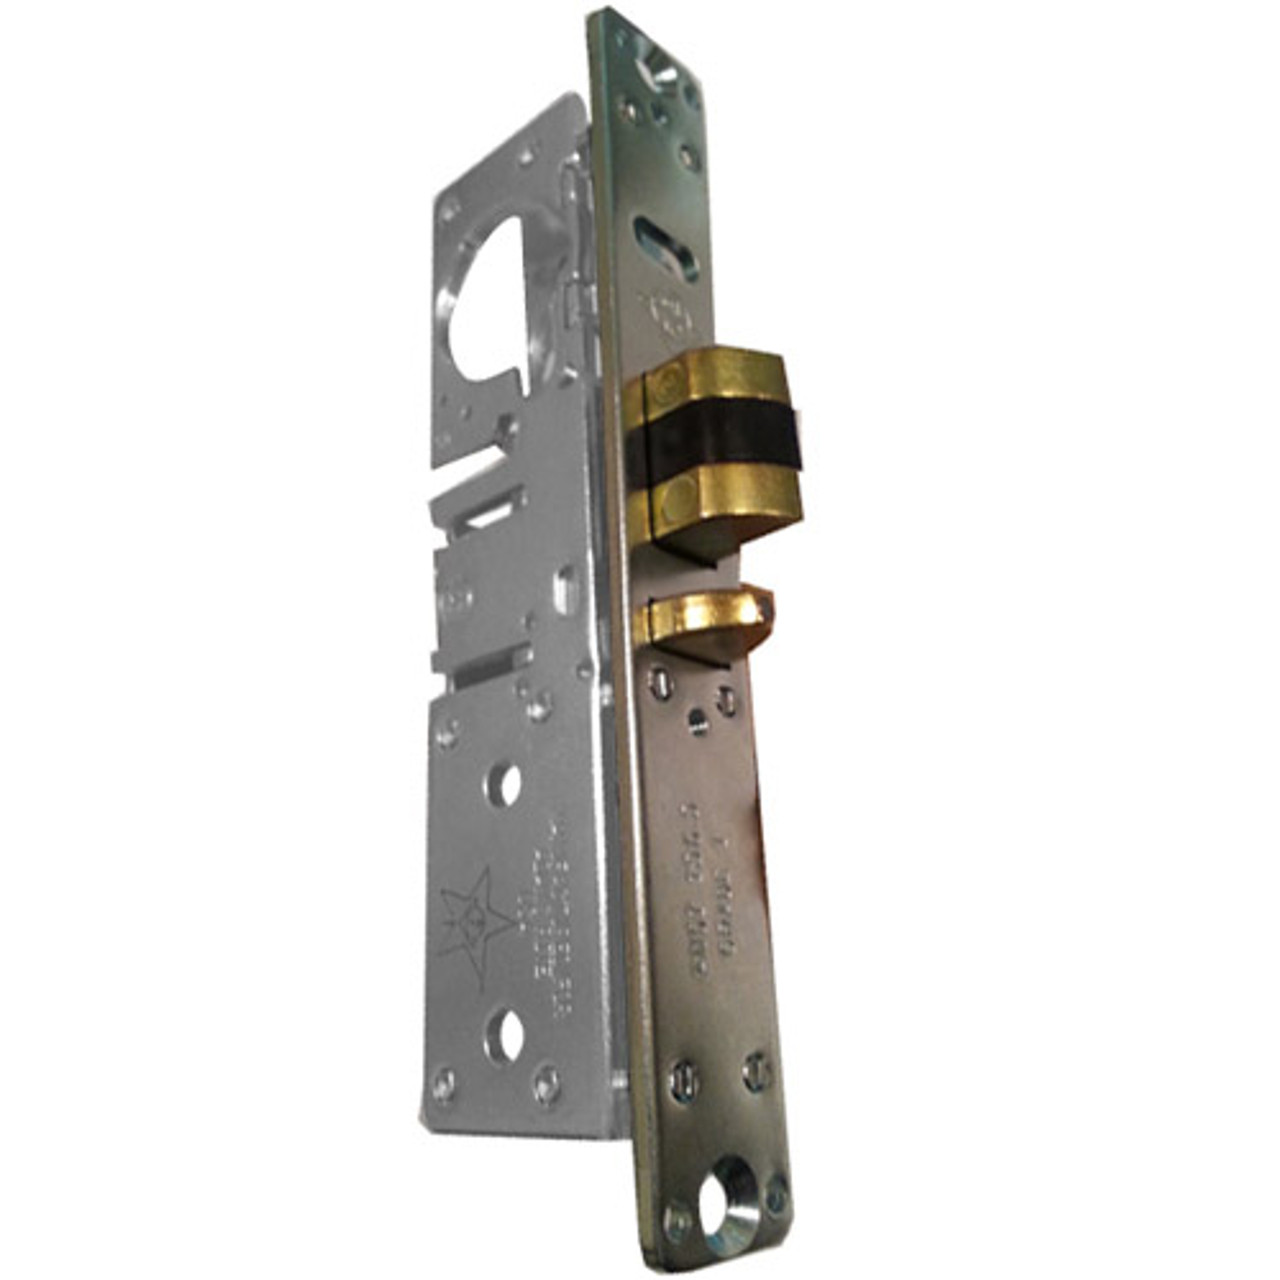 4531-15-202-628 Adams Rite Deadlatch with Radius Faceplate in Clear Anodized Finish